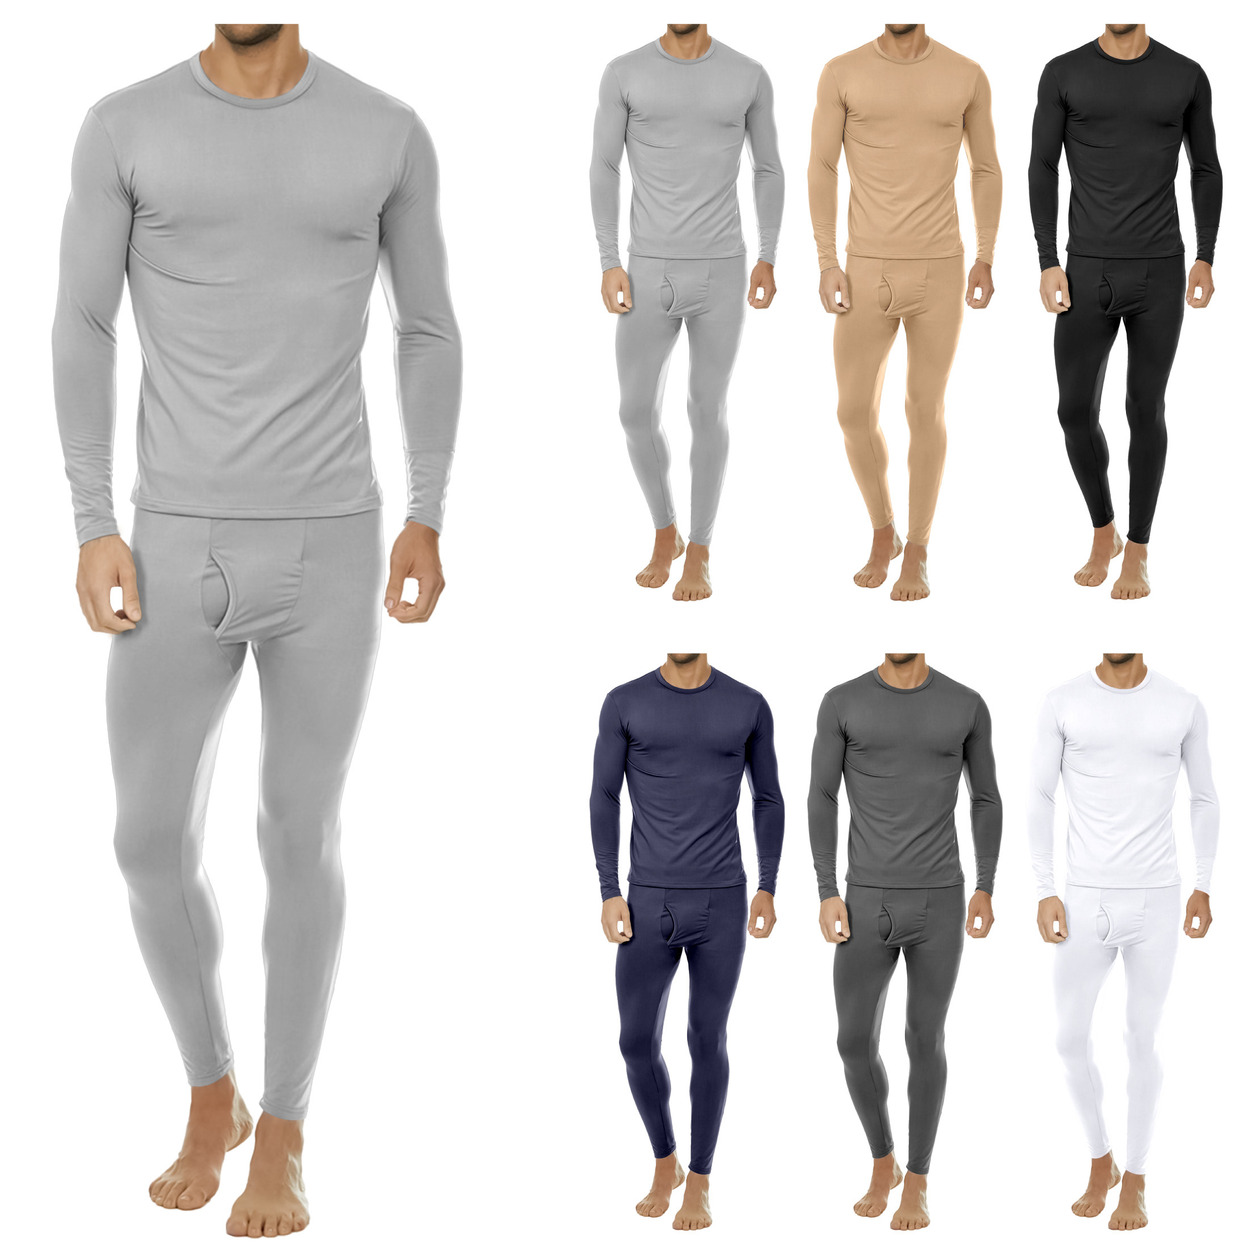 2-Sets: Men's Winter Warm Fleece Lined Thermal Underwear Set For Cold Weather - White&white, Xx-large